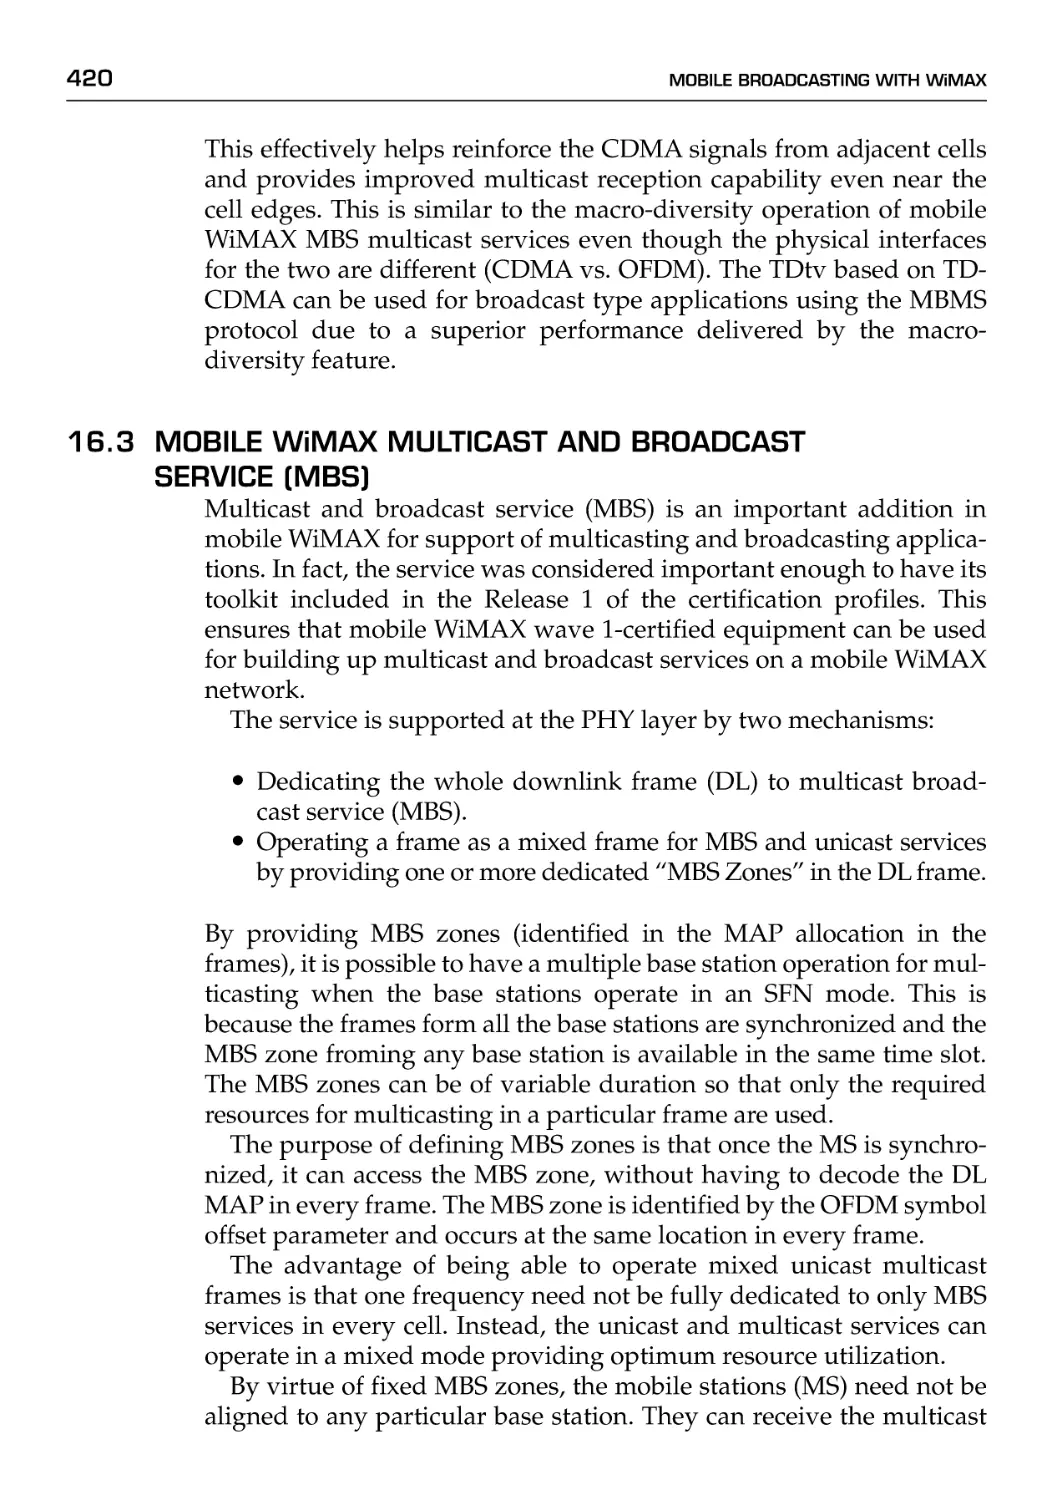 16.3 Mobile WiMAX Multicast and Broadcast Service (MBS)